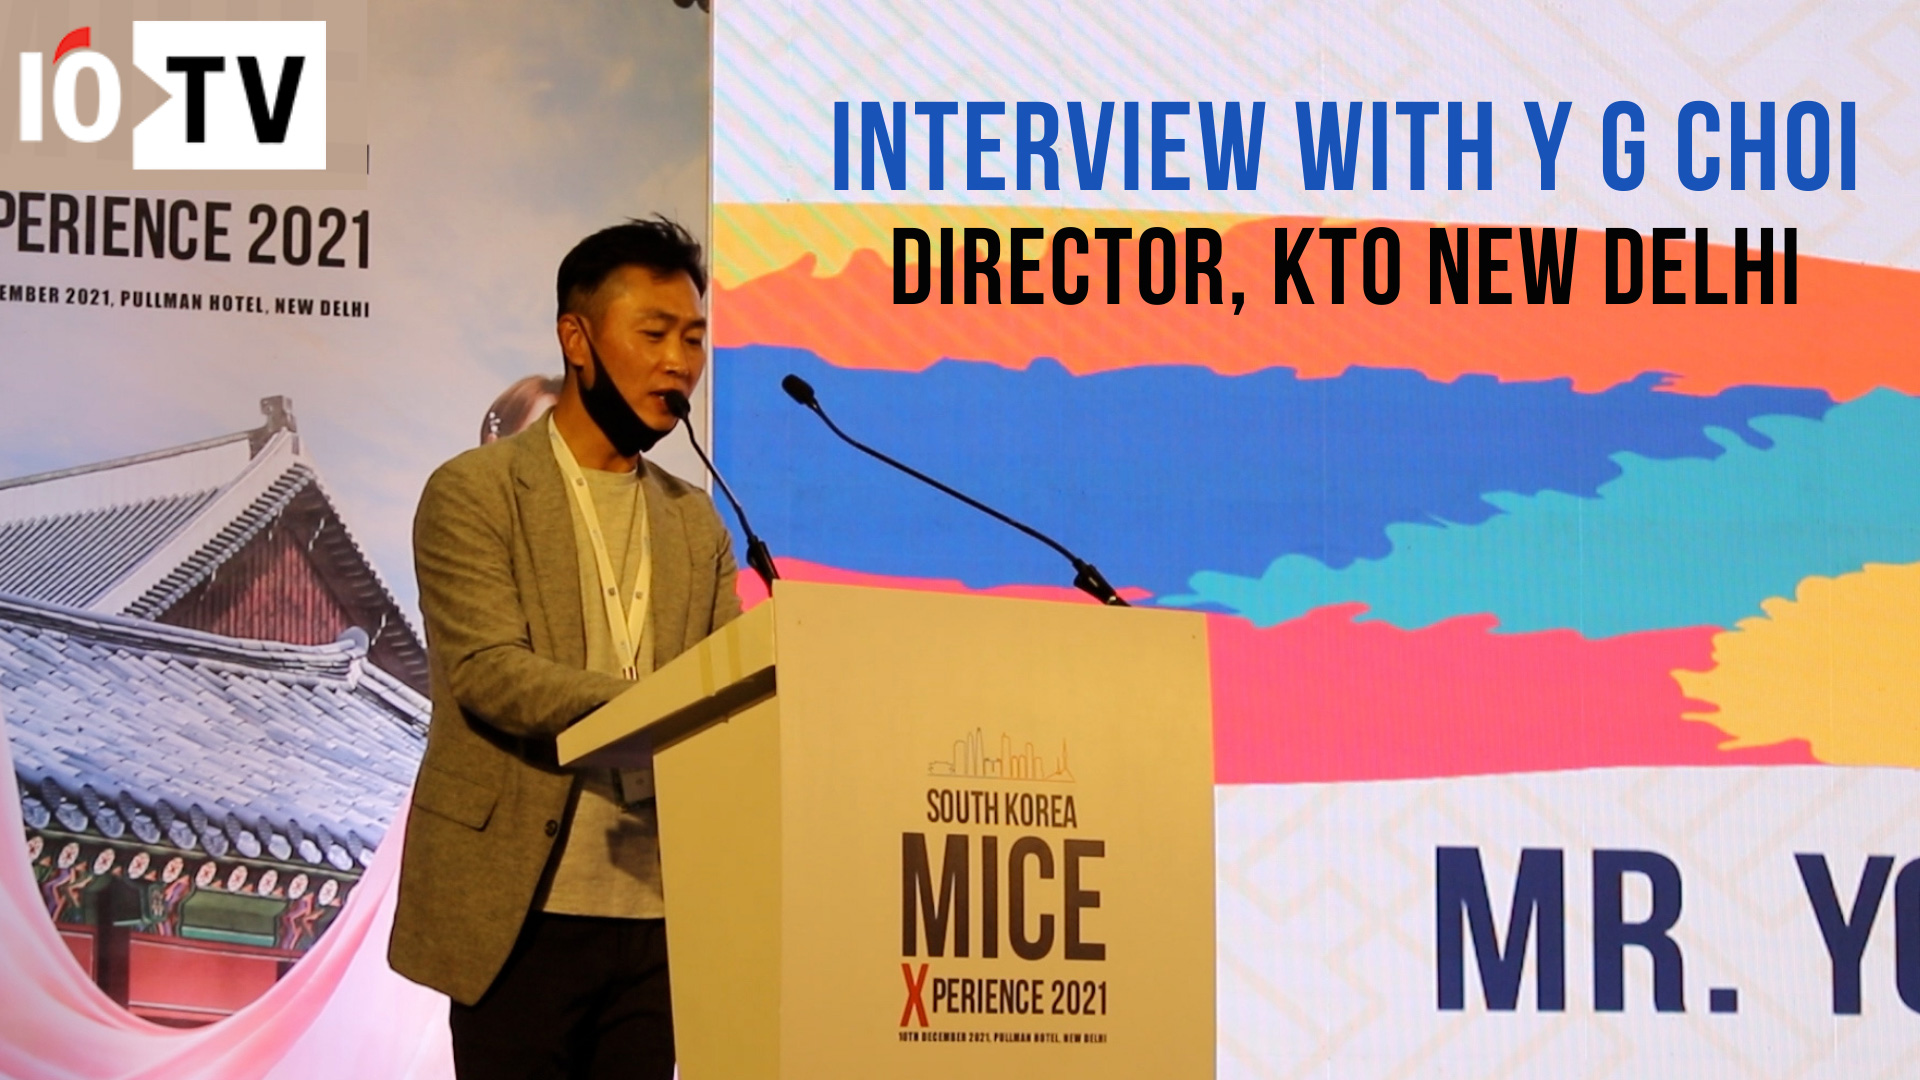 MICE Tourism in South Korea: Interview with Y G Choi, Director Korea Tourism Organisation, New Delhi